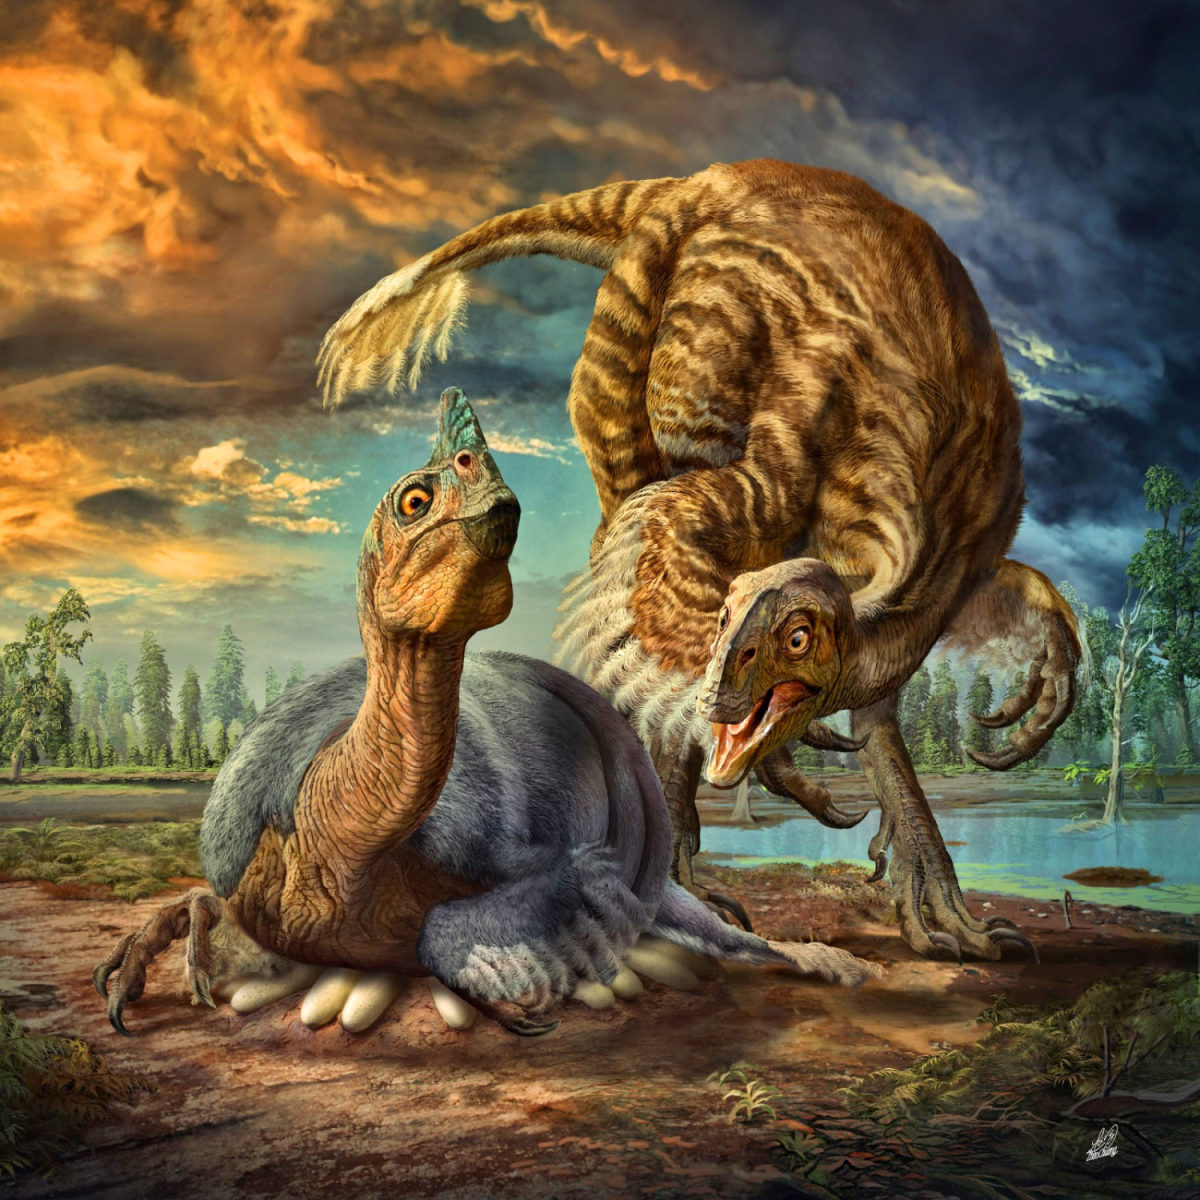 Beibeilong parents, by Zhao Chuang. Since male theropods have been found roosting on eggs, it's likely that the blue one is meant to be the father and the brown one is the mother.